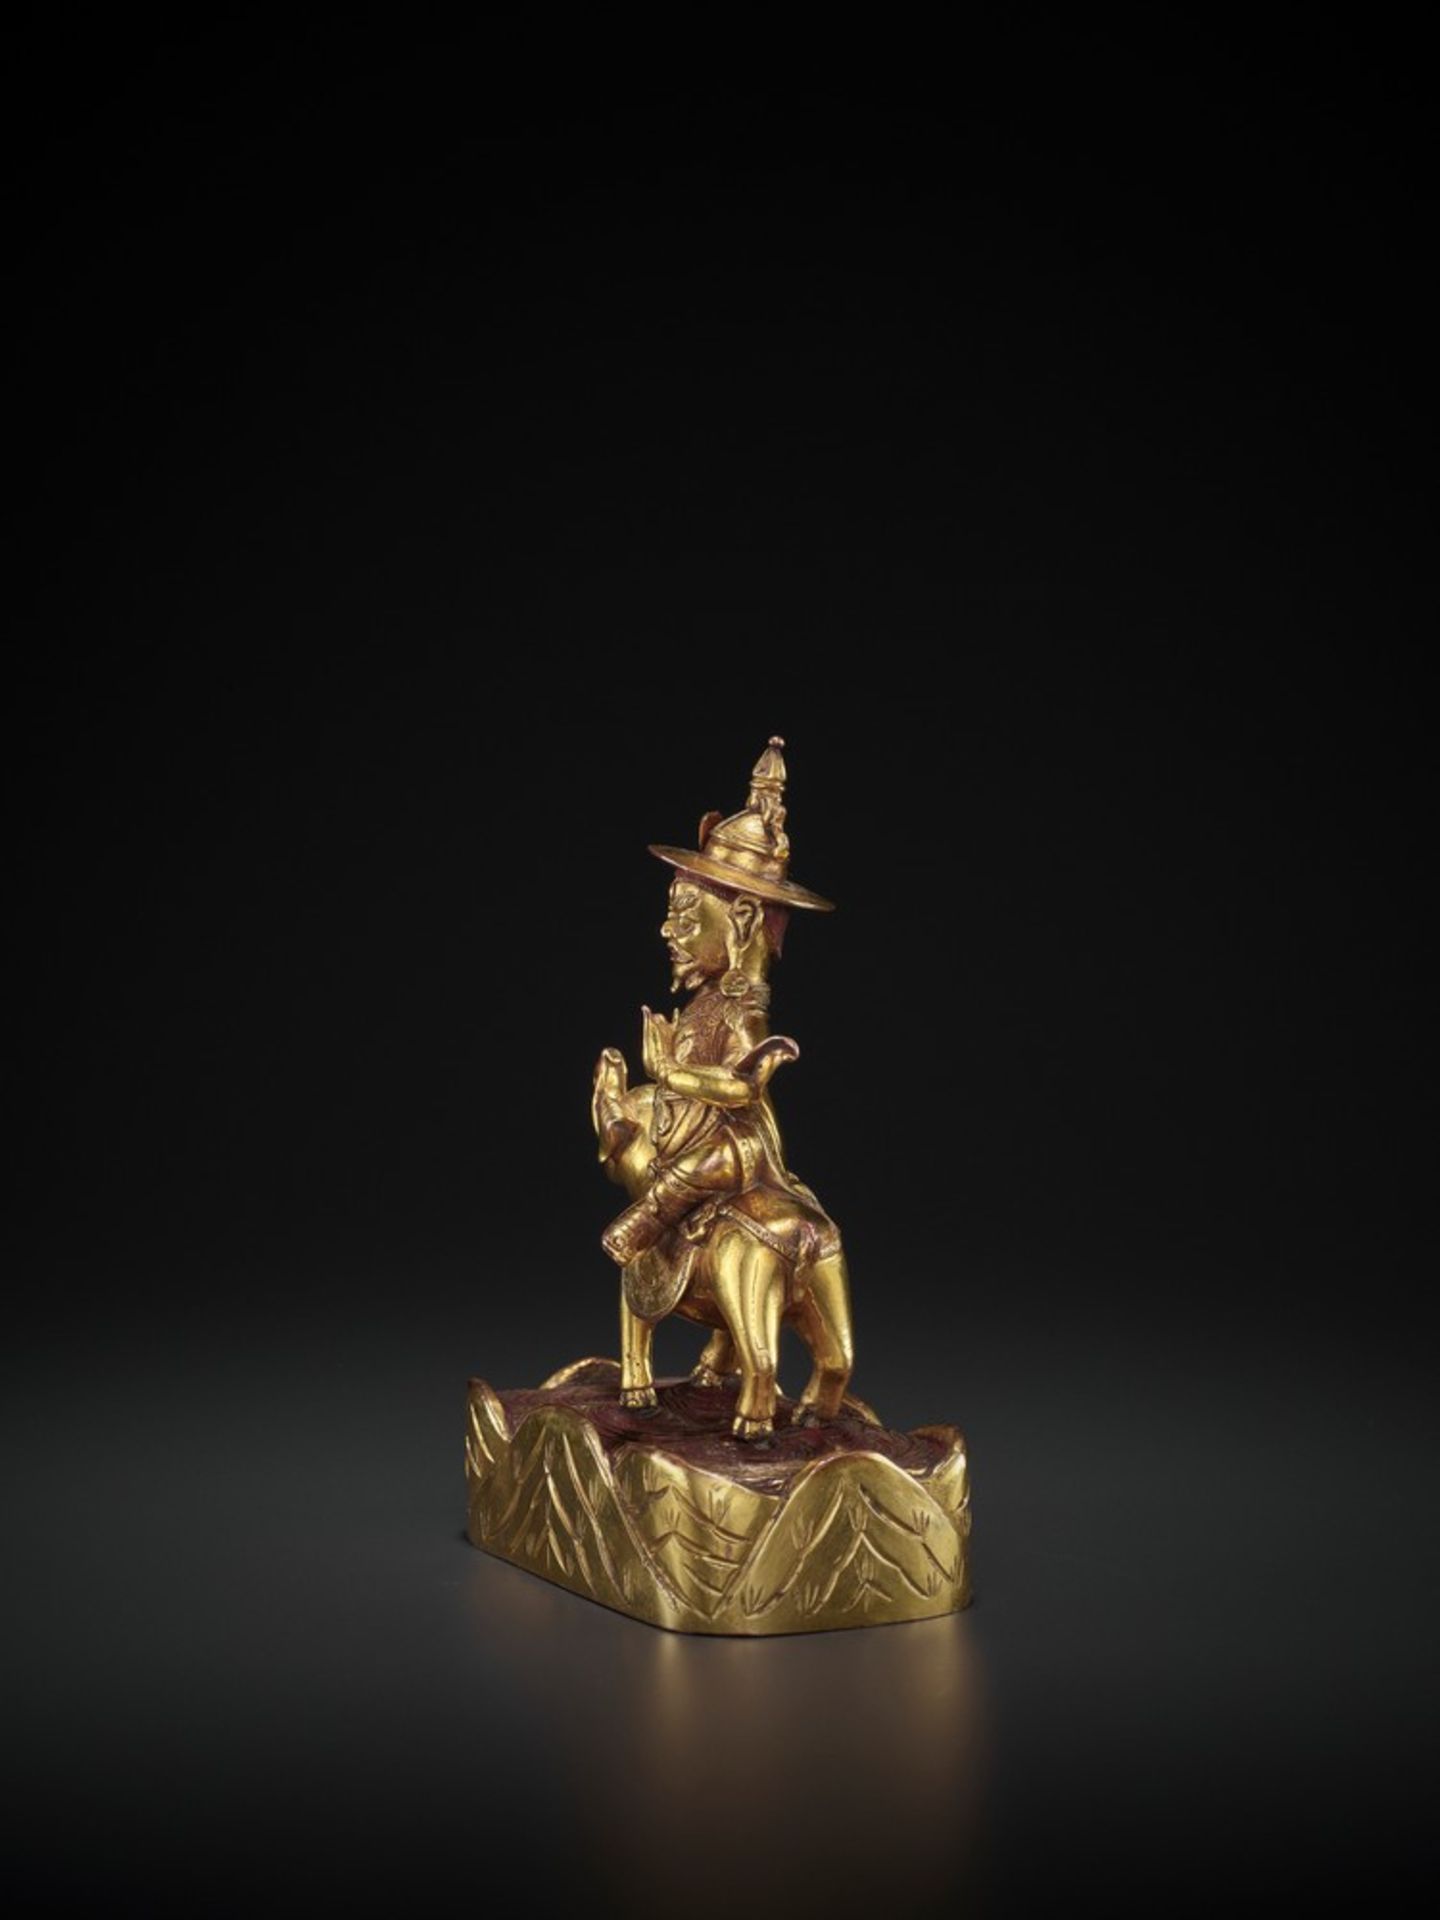 A GILT BRONZE FIGURE OF PEHAR GYALPO IN THE GYAJIN FORM, EARLY QING DYNASTY - Image 7 of 14